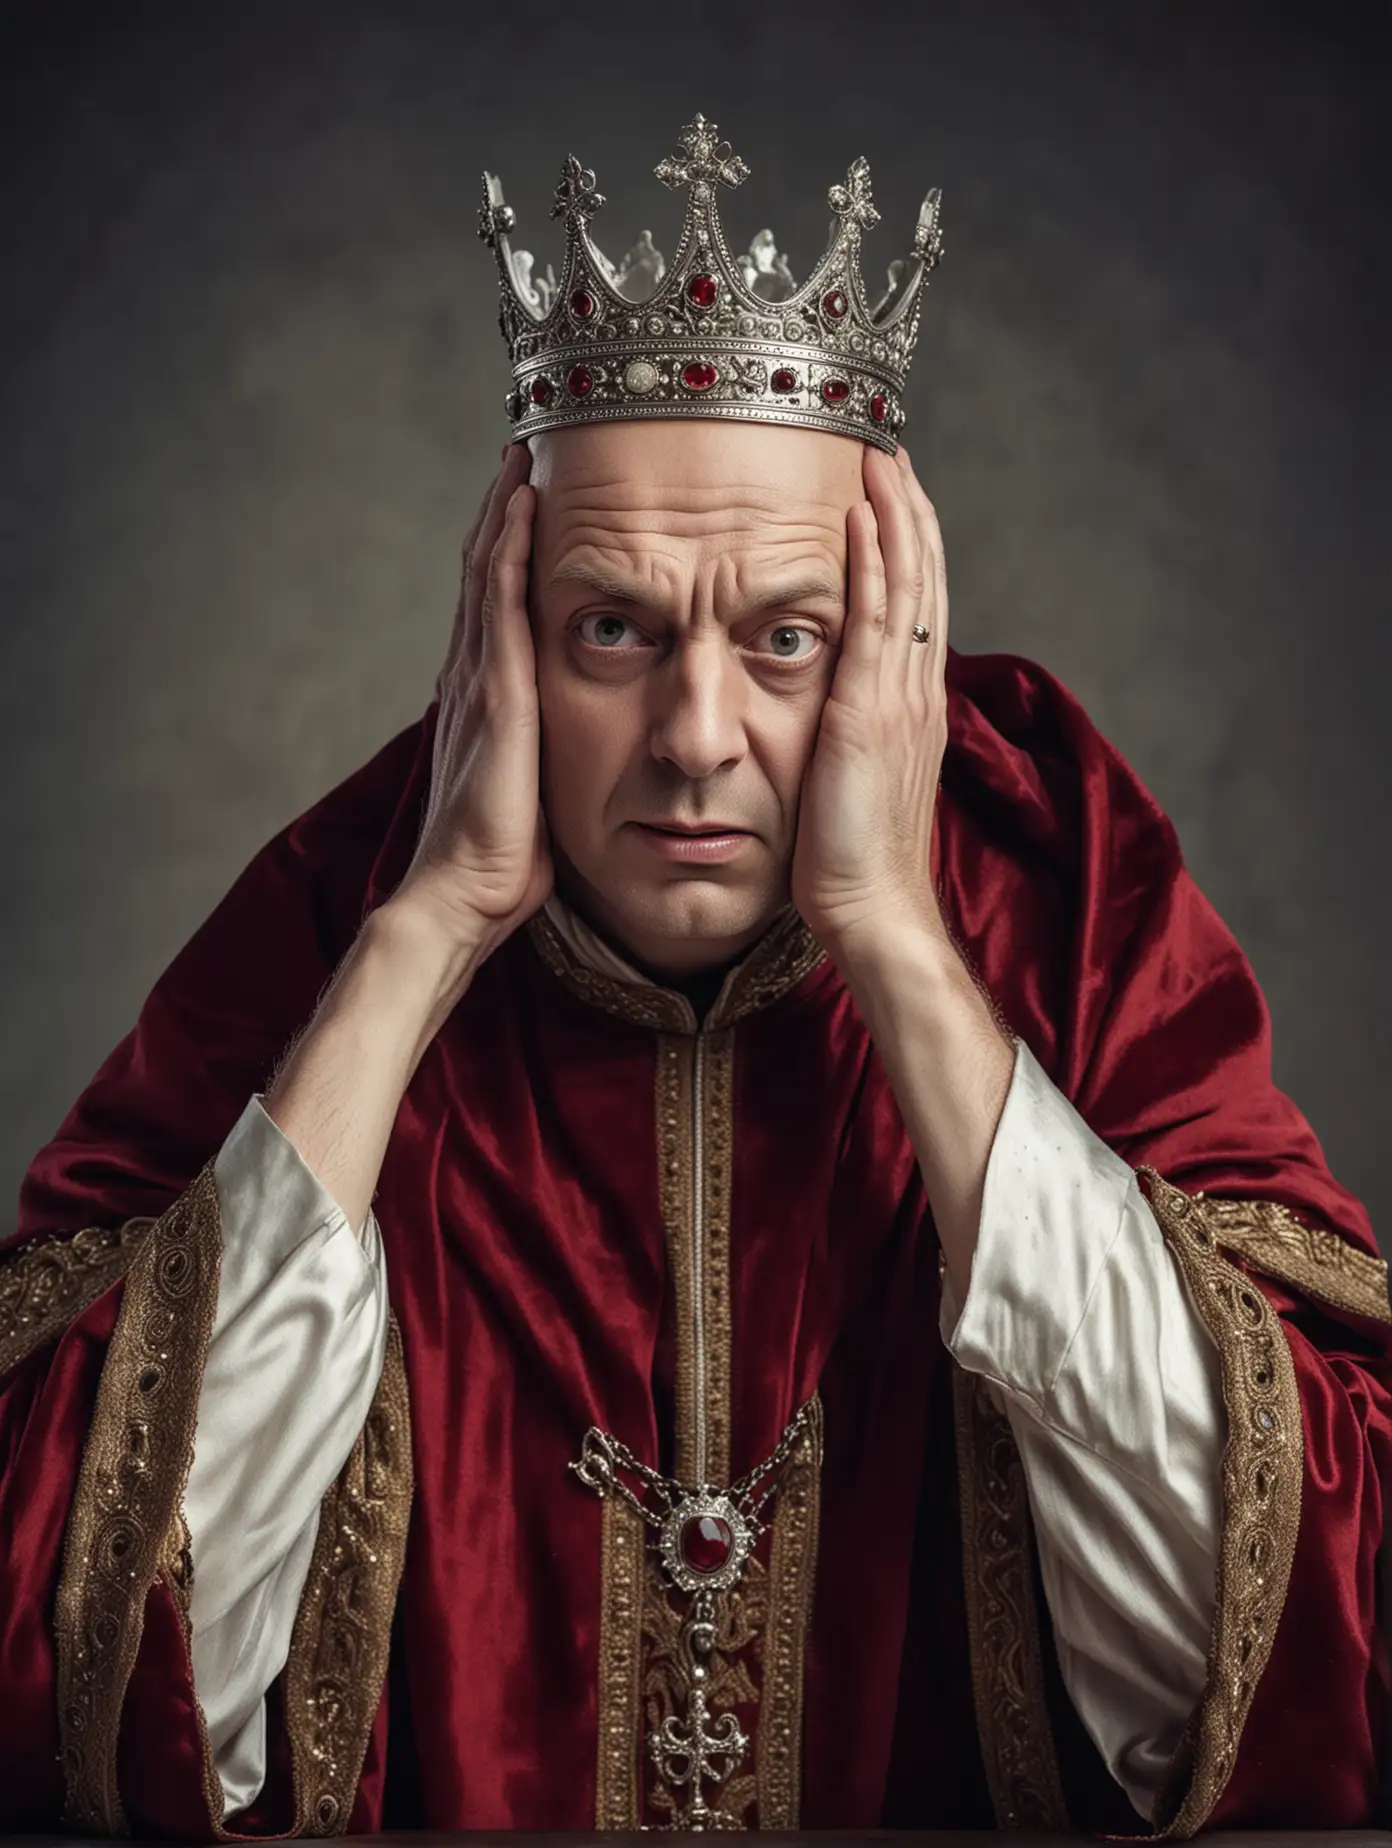 shocked bald medieval king clutching his head with both hands, silver crown, maroon robe